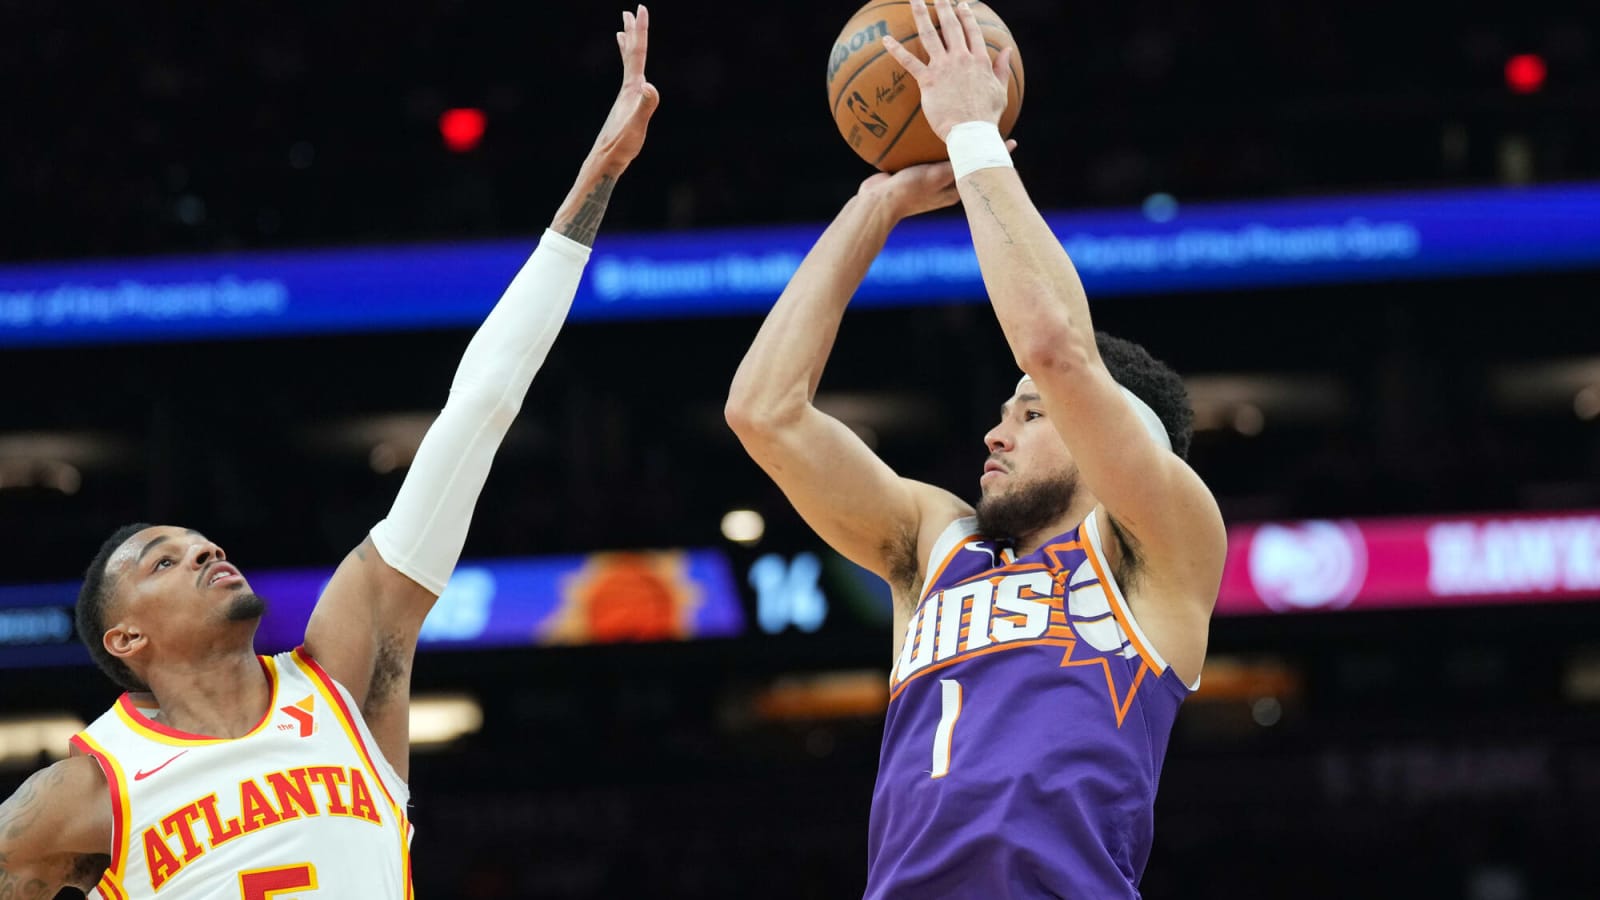 Booker and Suns’ Sharpshooting Overpower Hawks for 128-115 Victory